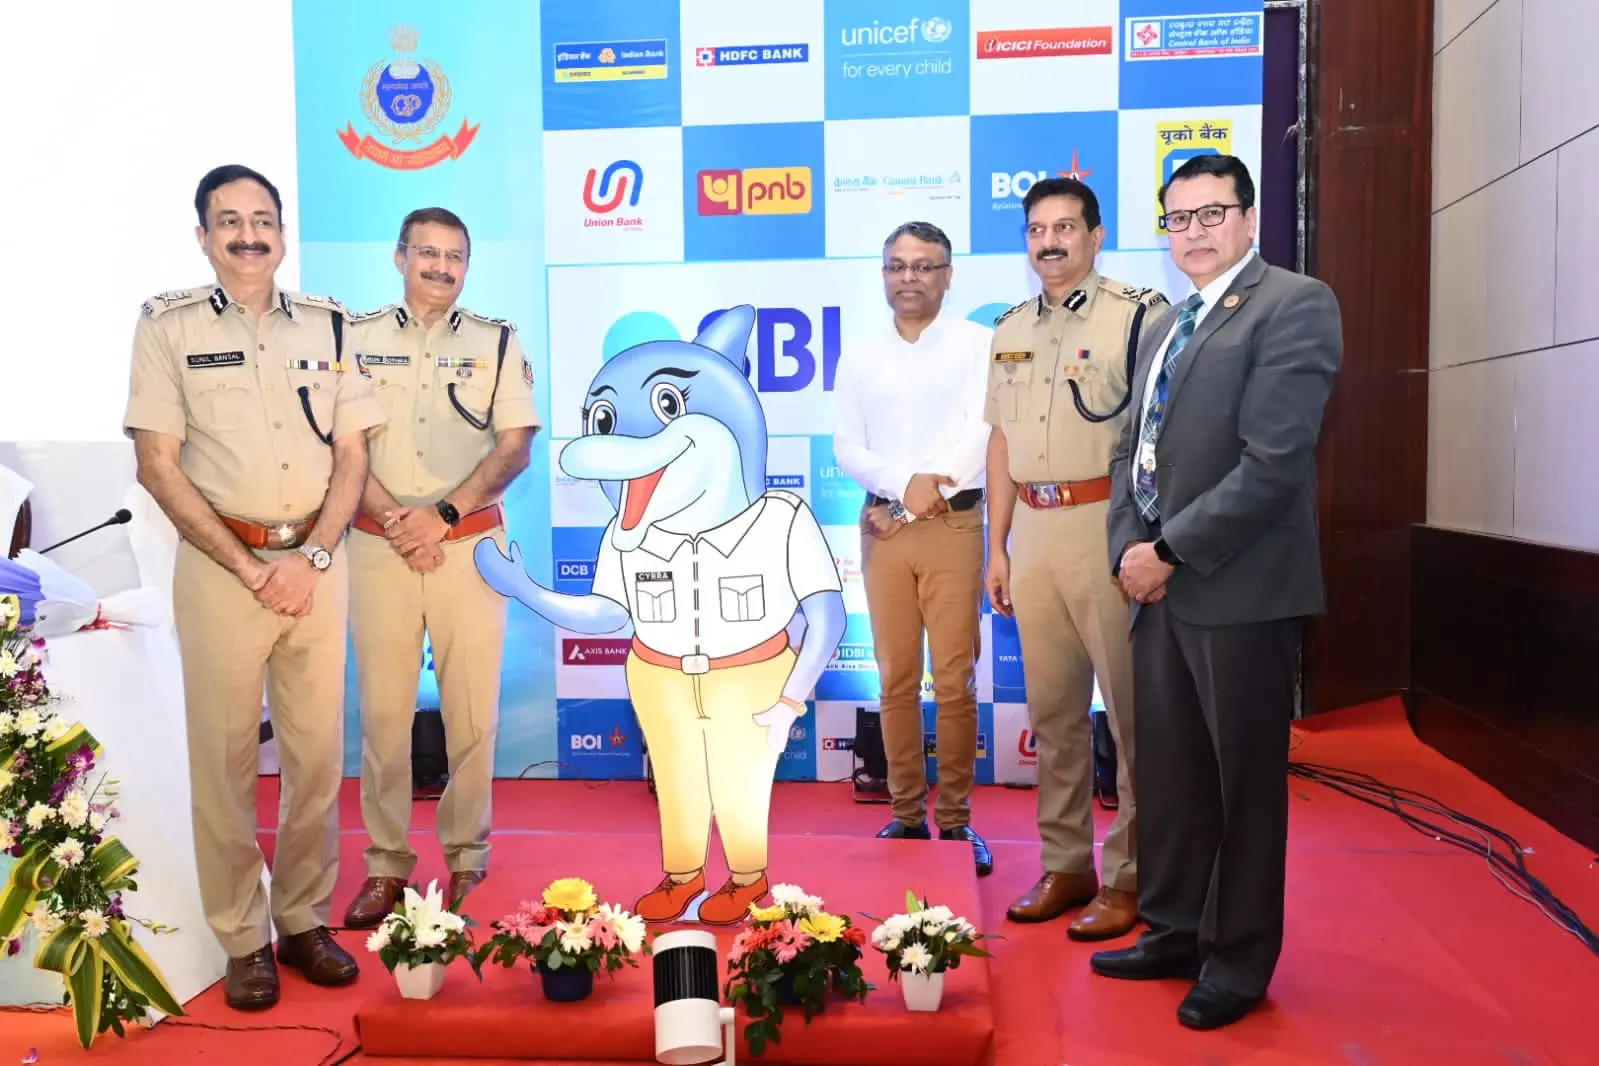 Odisha DGP unveils mascot ‘Cyrra’ for cyber safety campaign | Bhubaneswar News – Times of India